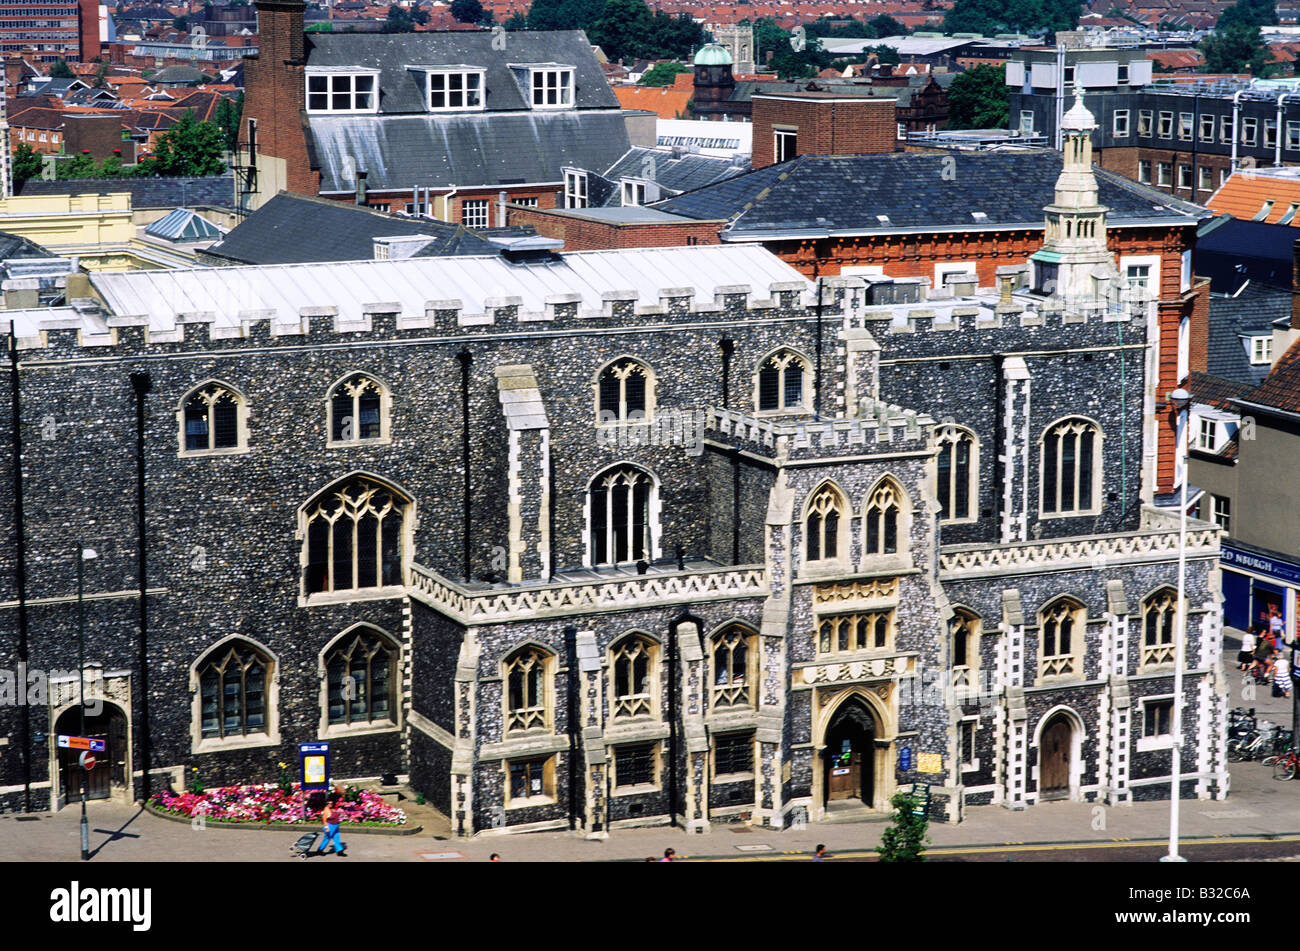 Norwich Guildhall Norfolk 15th century Medieval English Gothic architecture East Anglia England UK flint stone city landscape Stock Photo